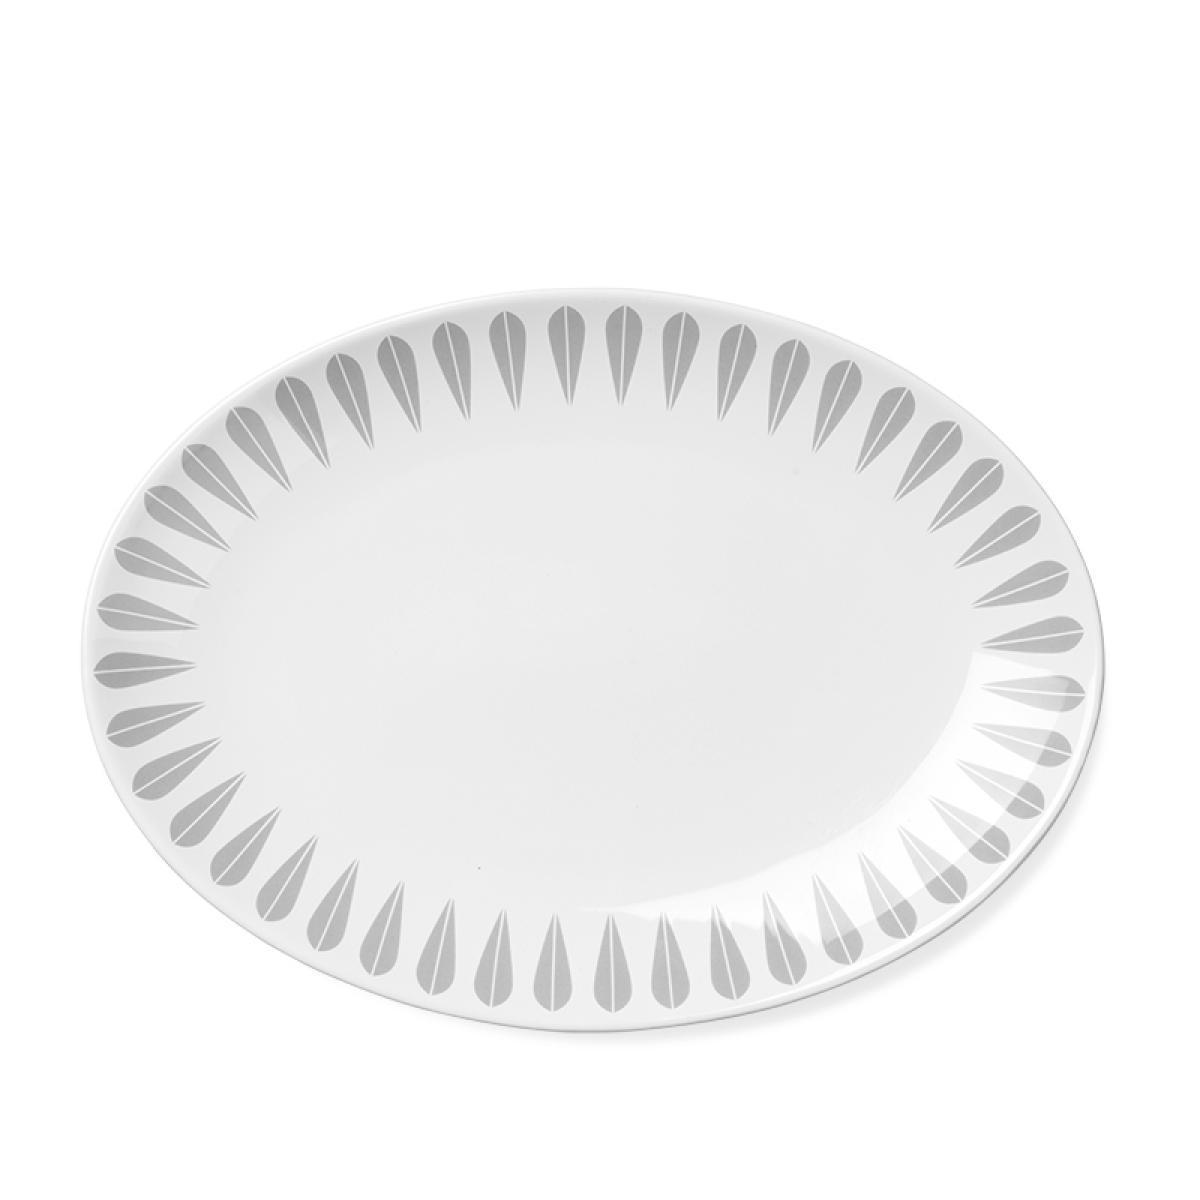 Lucie Kaas Arne Clausen Collection Serving Plate Grey, 34 cm